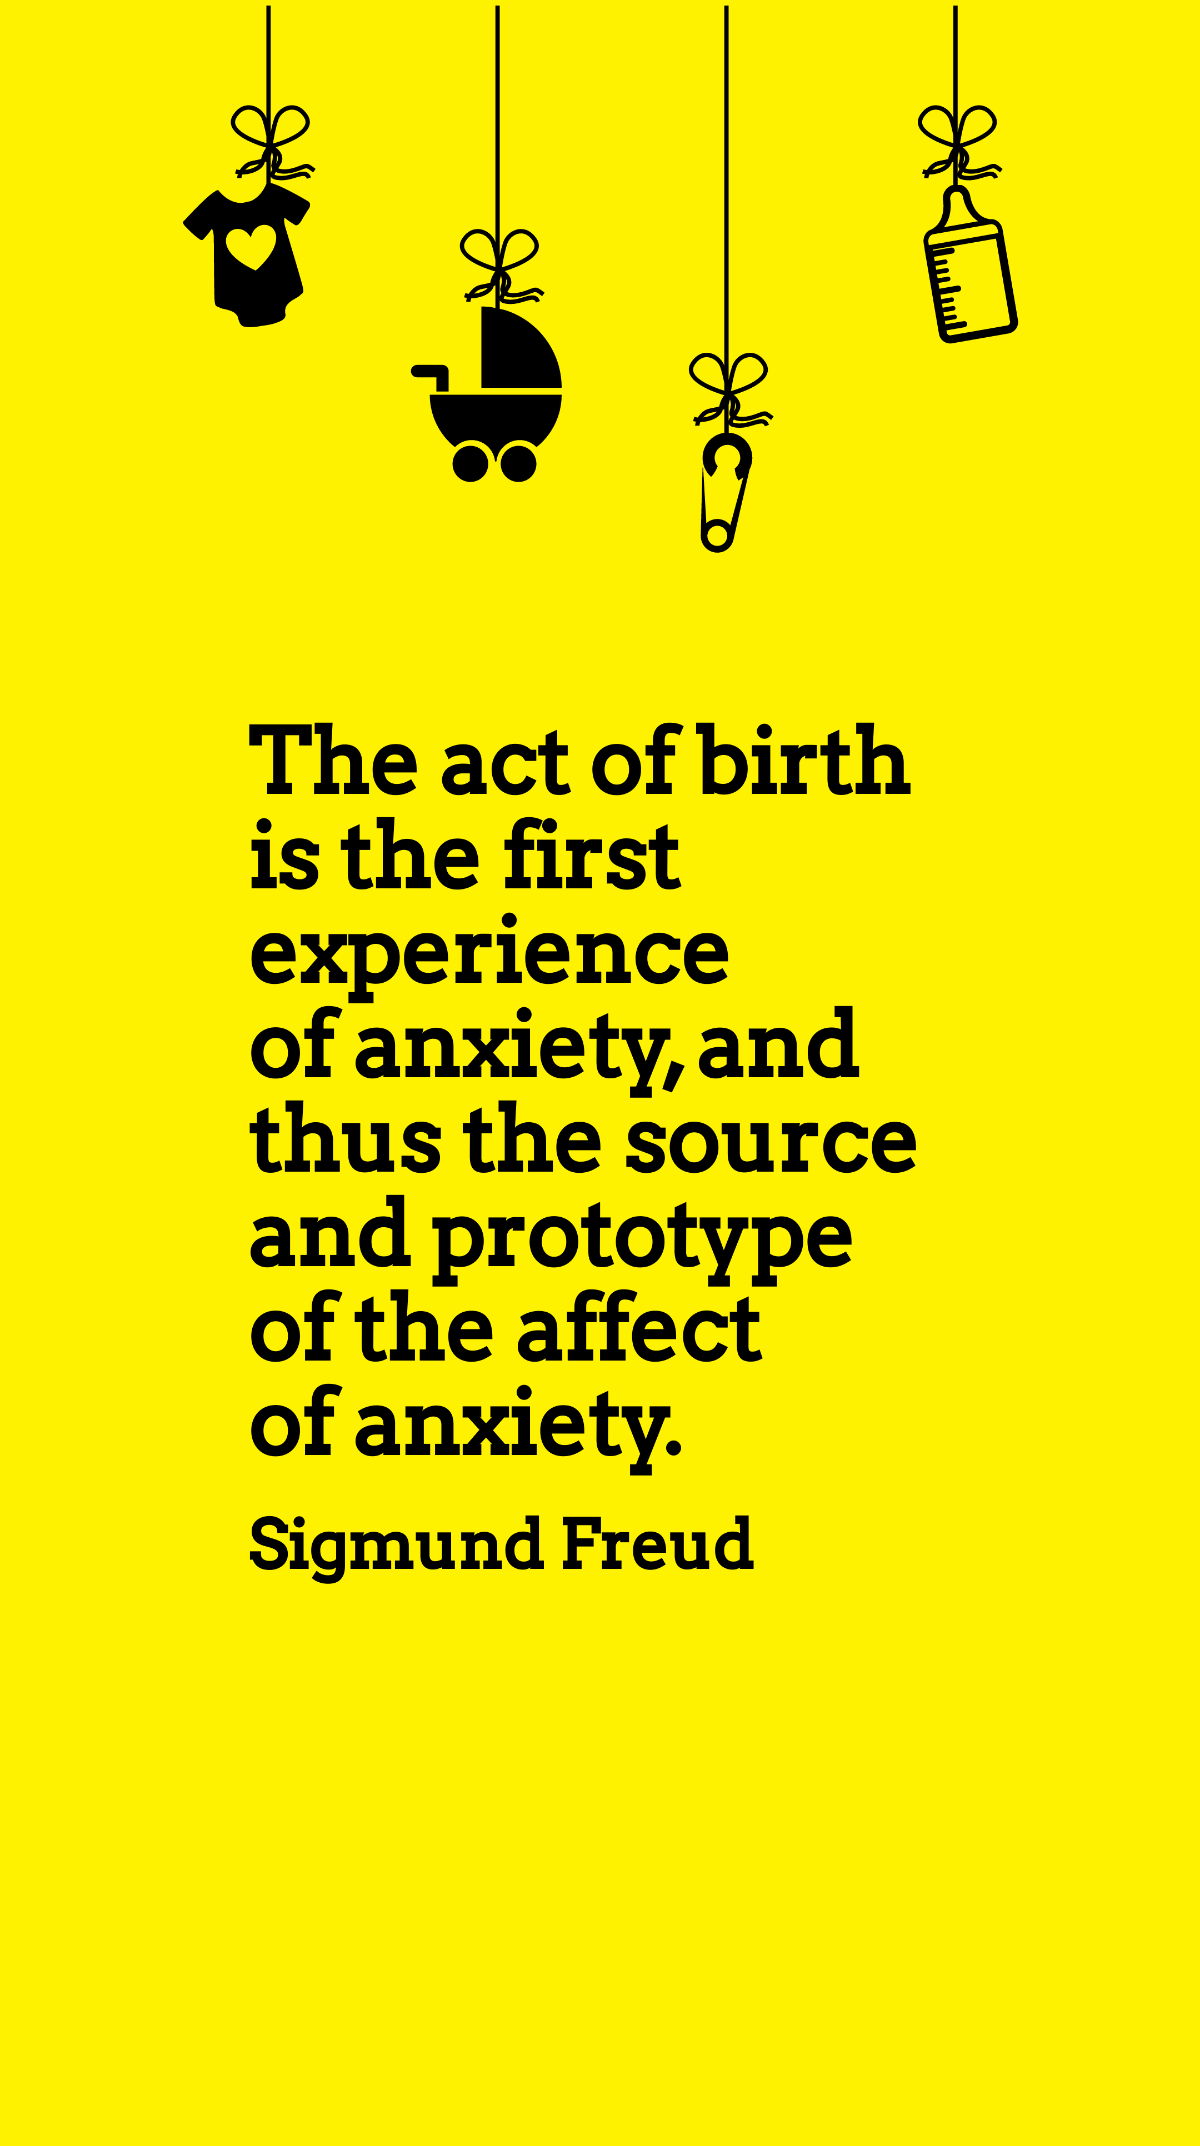 Free Sigmund Freud - The act of birth is the first experience of anxiety, and thus the source and prototype of the affect of anxiety. Template